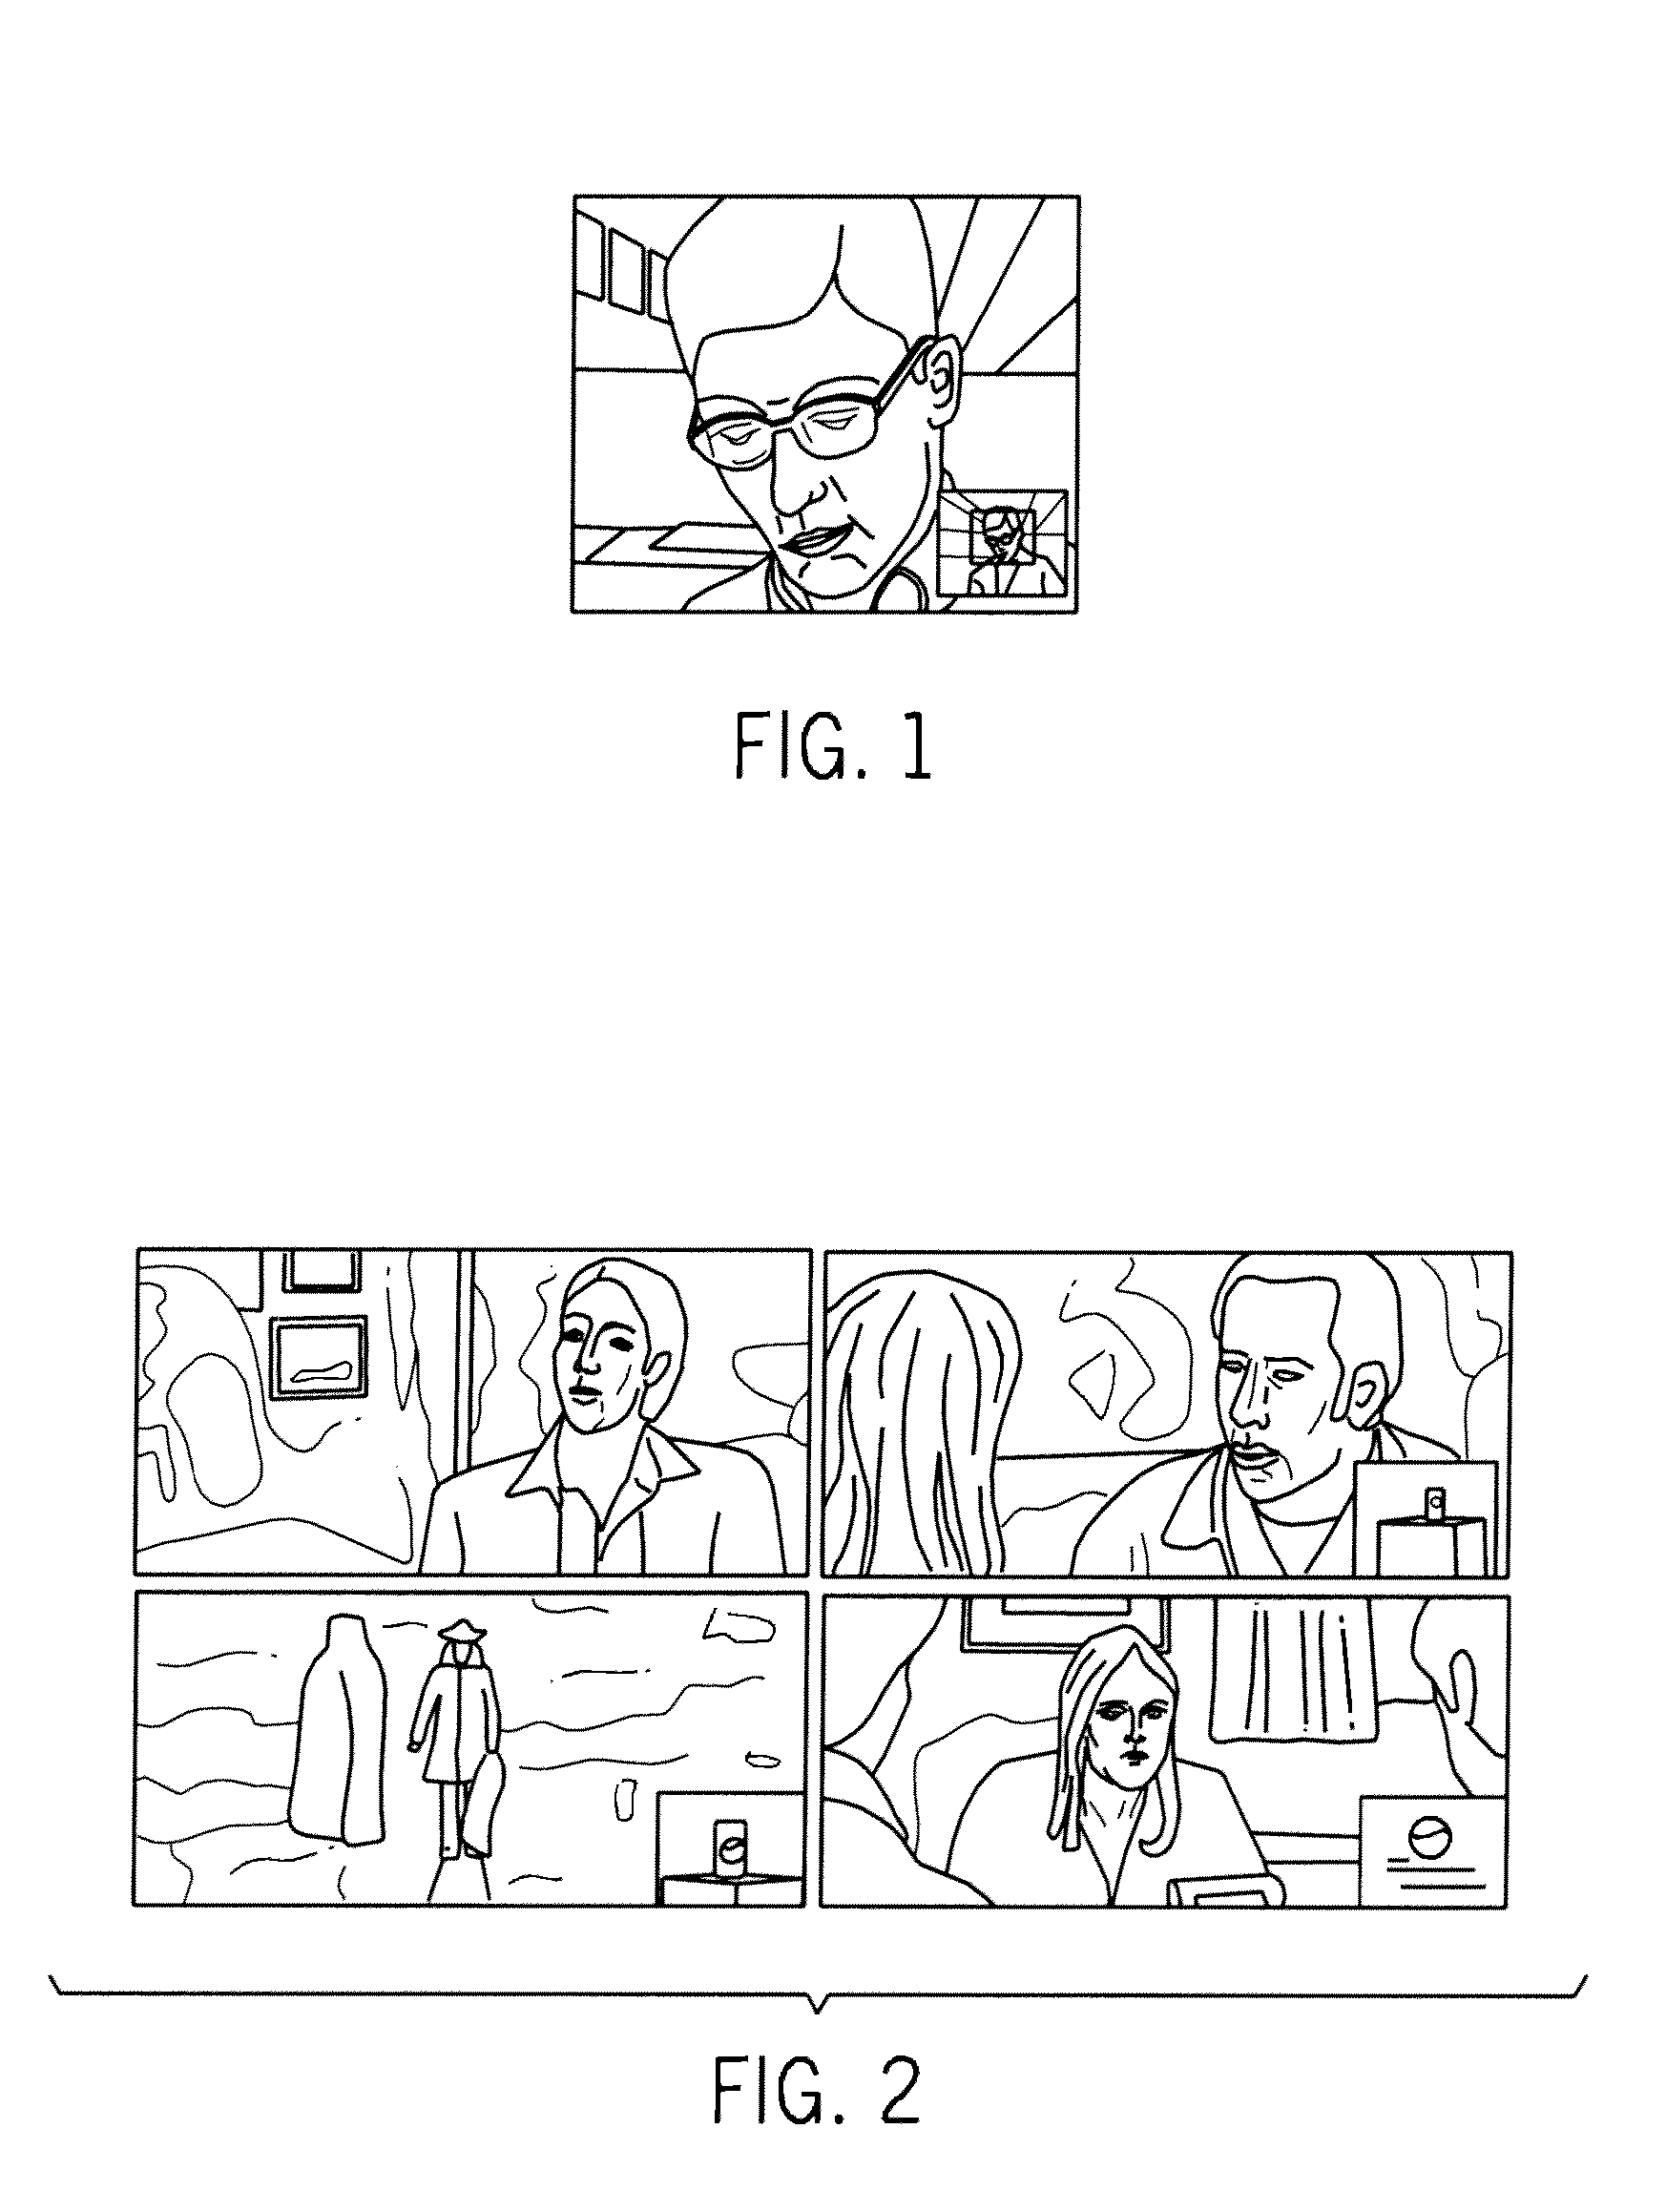 Method for insertion and overlay of media content upon an underlying visual media